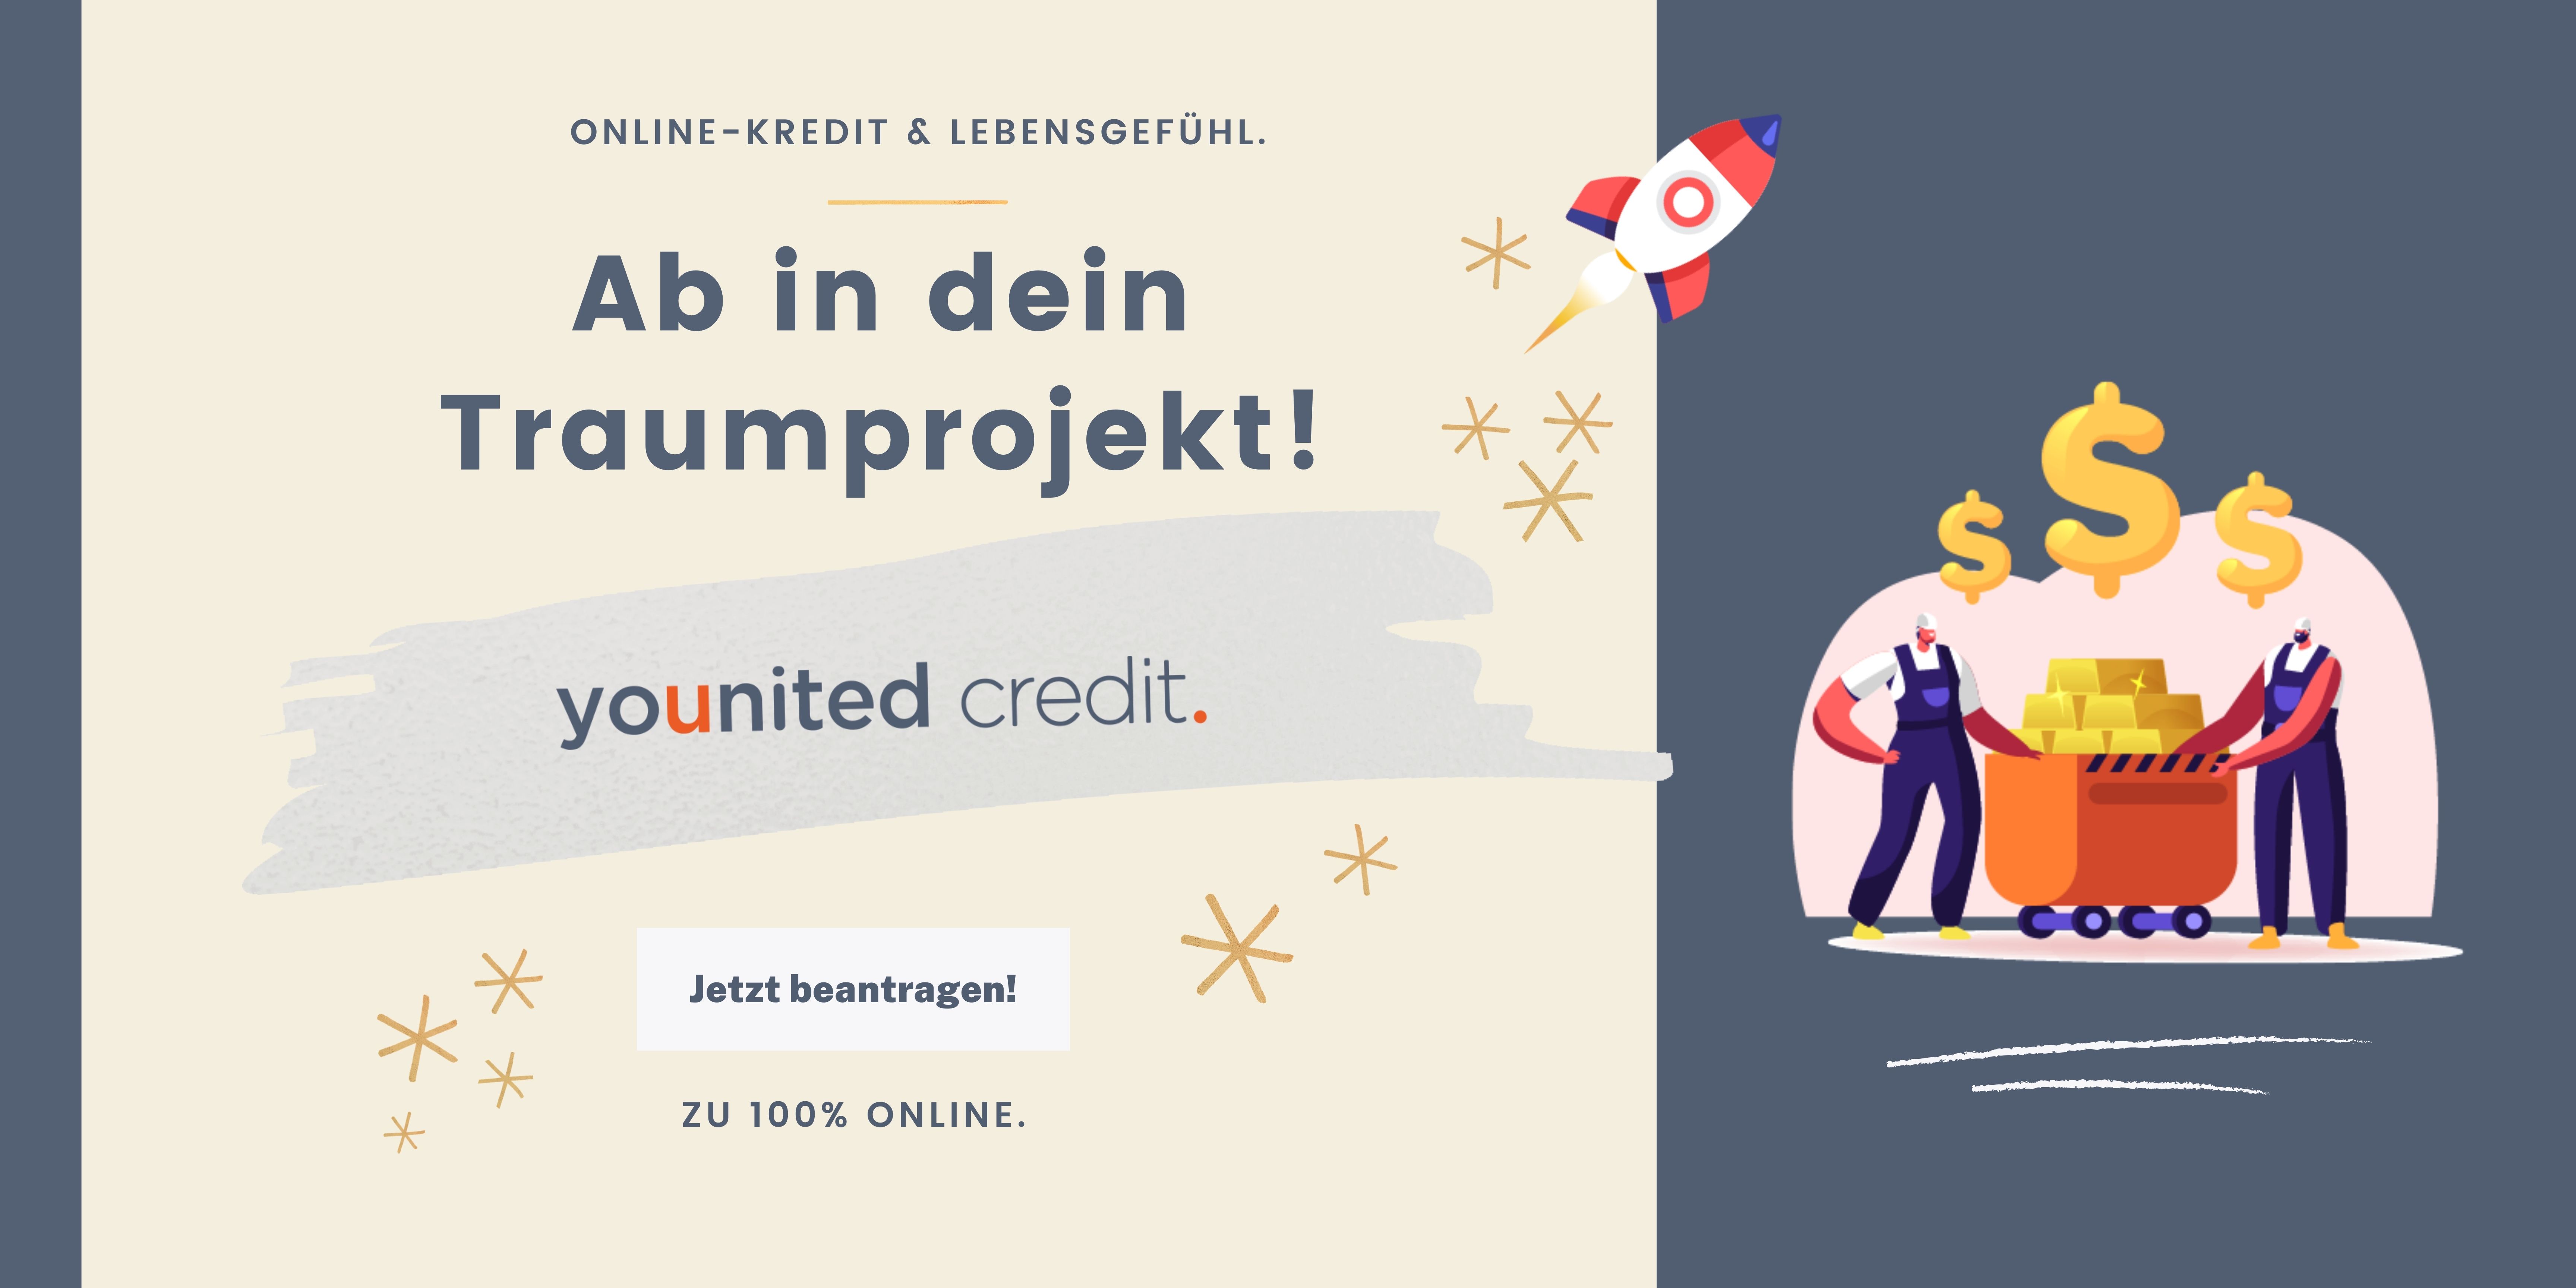 Younited Credit Traumprojekt - Buy now, pay later